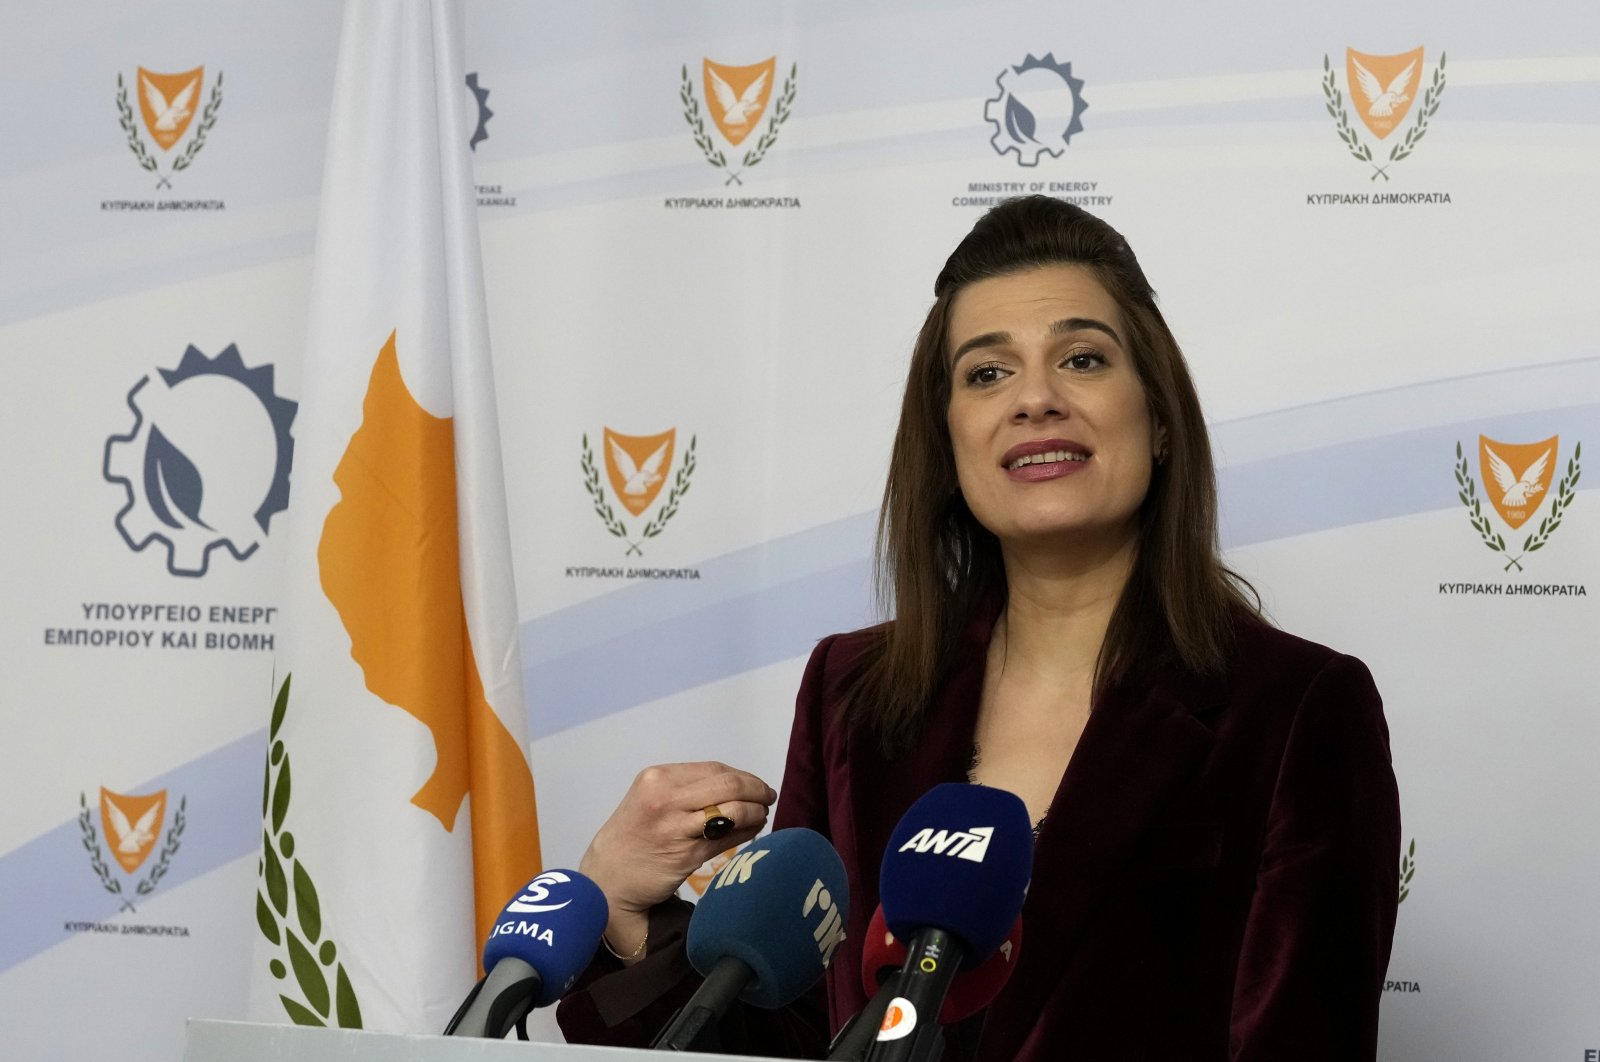 Greek Cypriot Energy Minister Natasa Pilides talks to the media during a press conference at the Energy Ministry in Nicosia (Lefkoşa), Greek Cyprus, Jan. 27, 2022. (AP Photo)